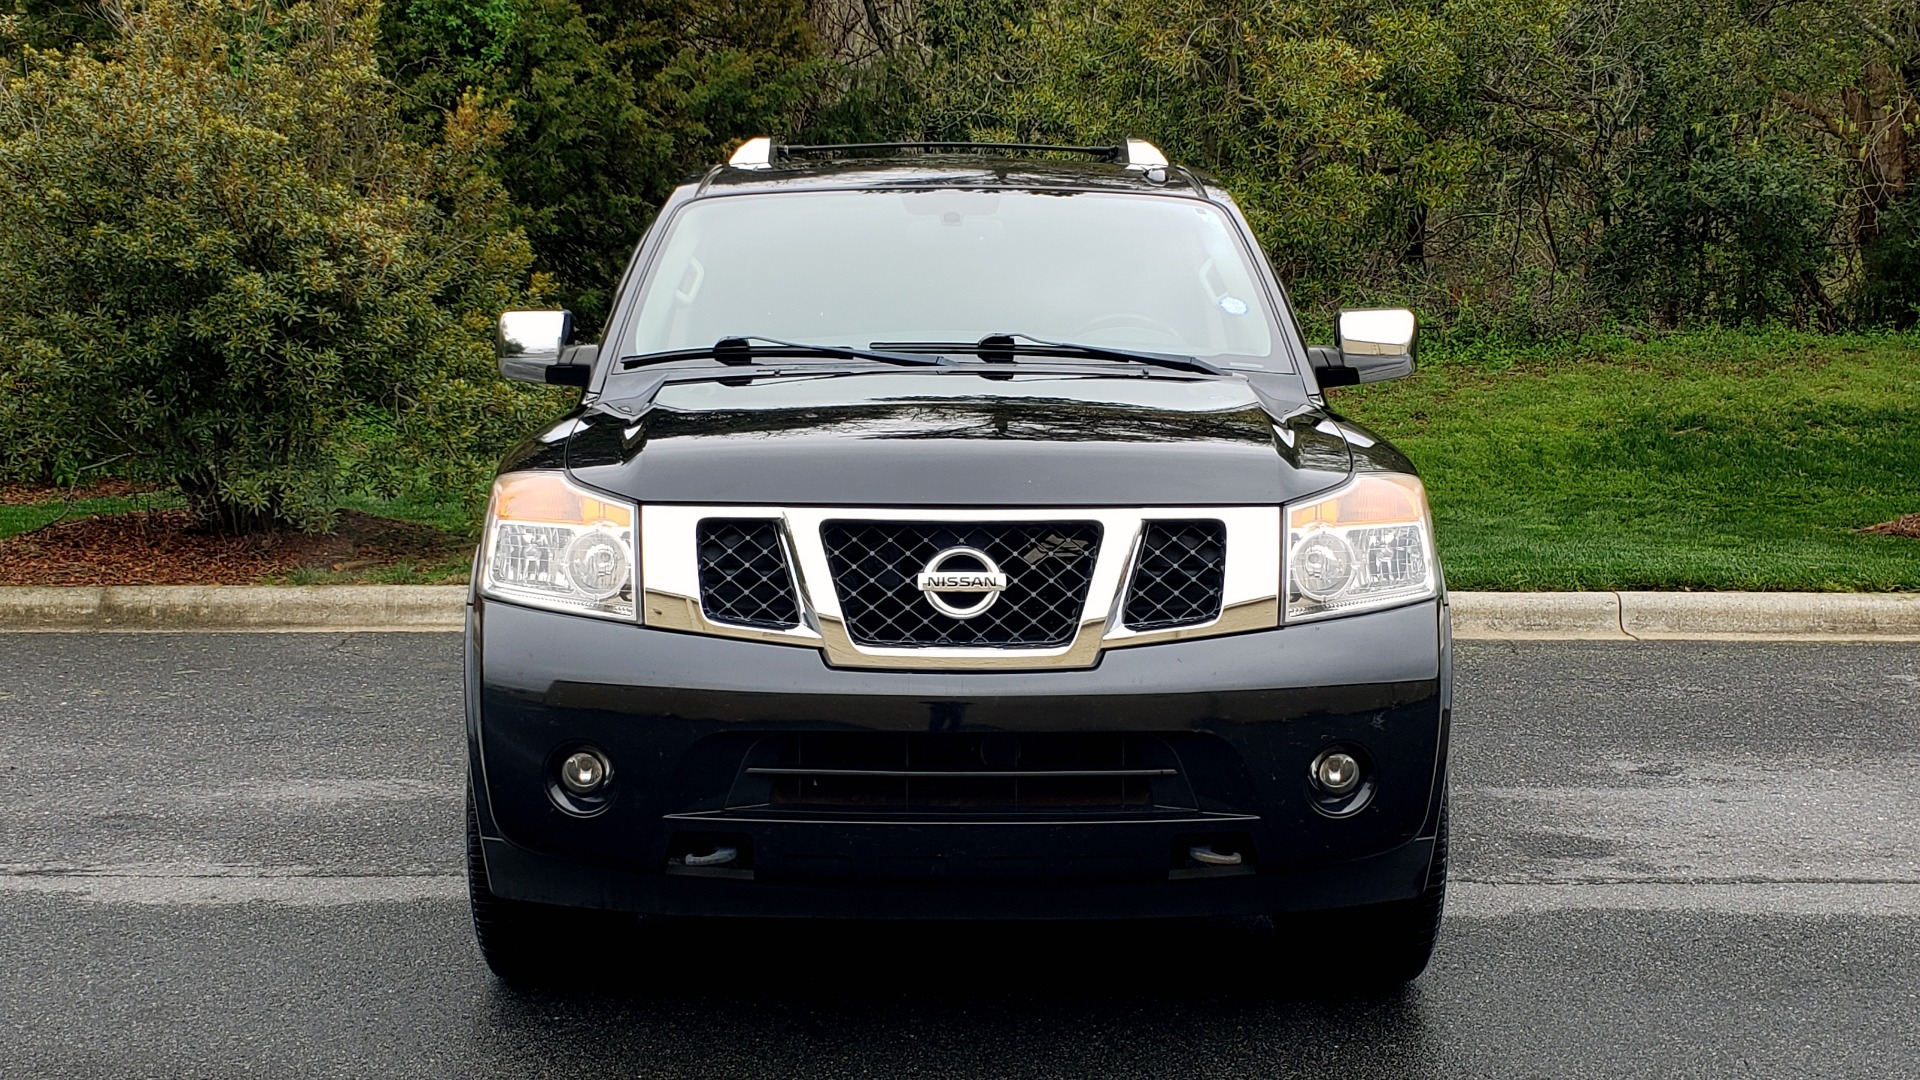 Used 2013 Nissan ARMADA SL 4WD / 5.6L V8 / NAV / SUNROOF / 3-ROW / REARVIEW for sale Sold at Formula Imports in Charlotte NC 28227 23